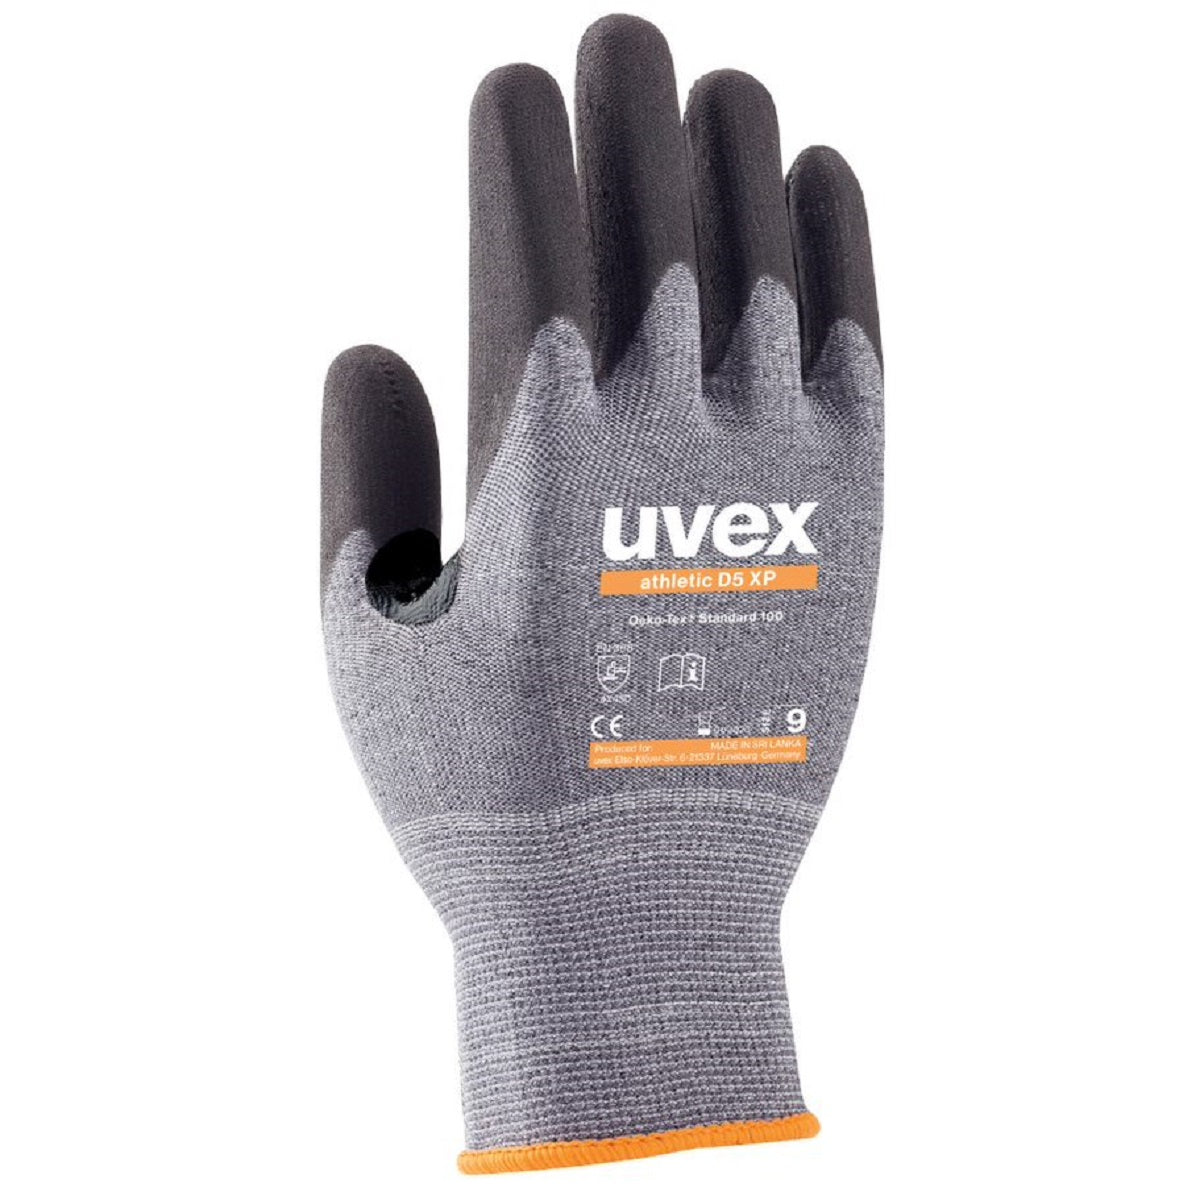 uvex athletic D5 XP cut-resistant safety work gloves grey blackprotexu